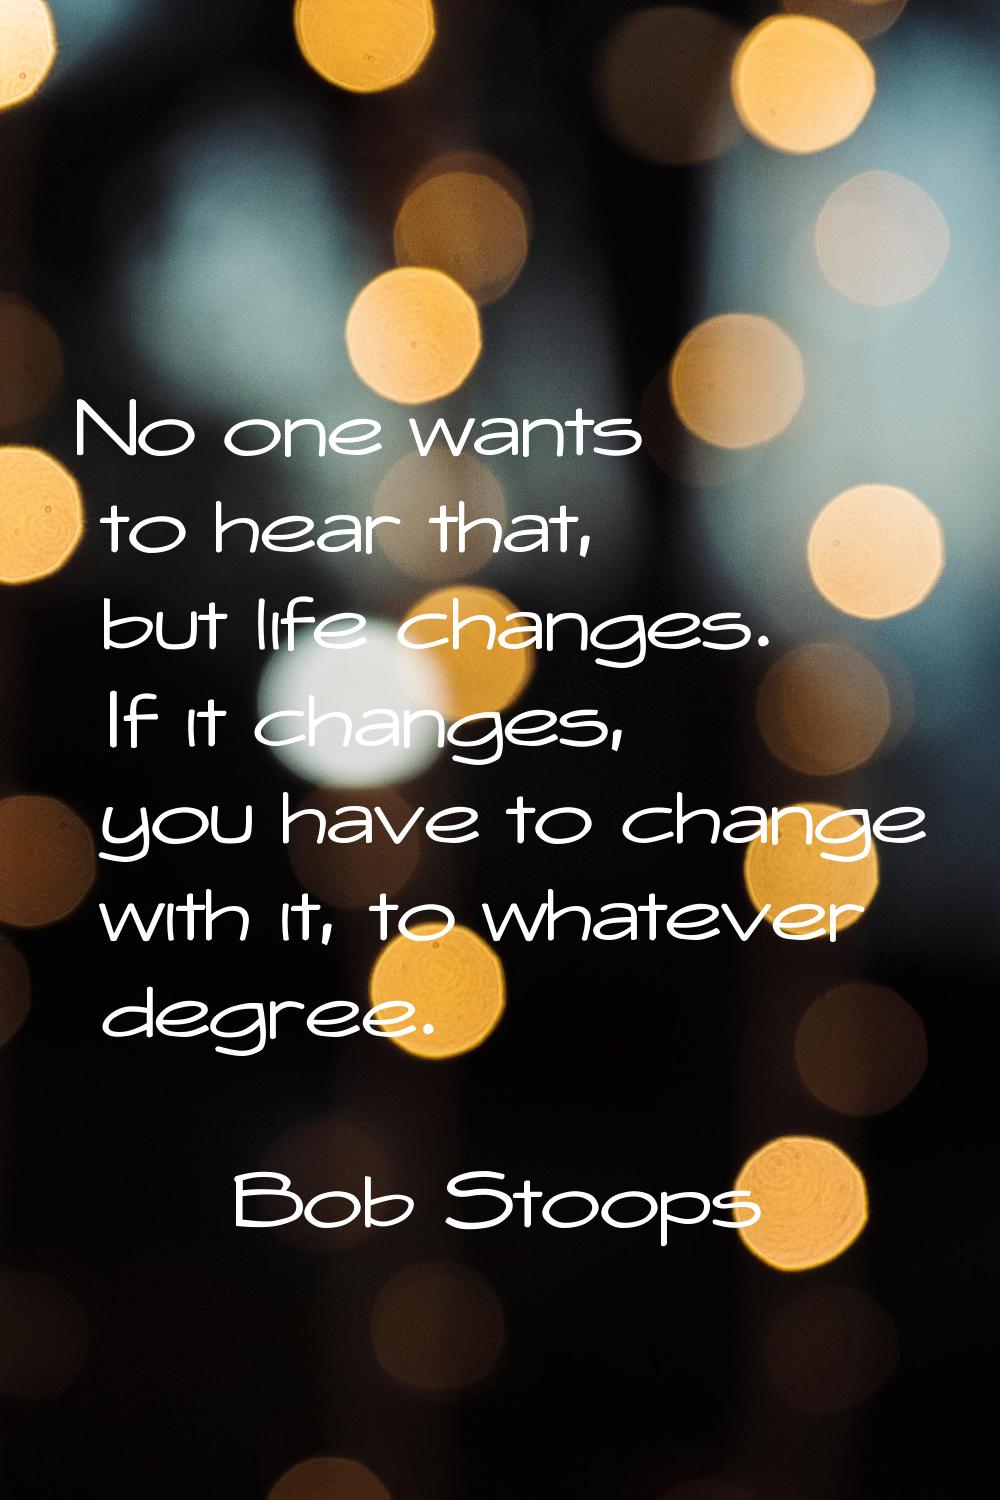 No one wants to hear that, but life changes. If it changes, you have to change with it, to whatever